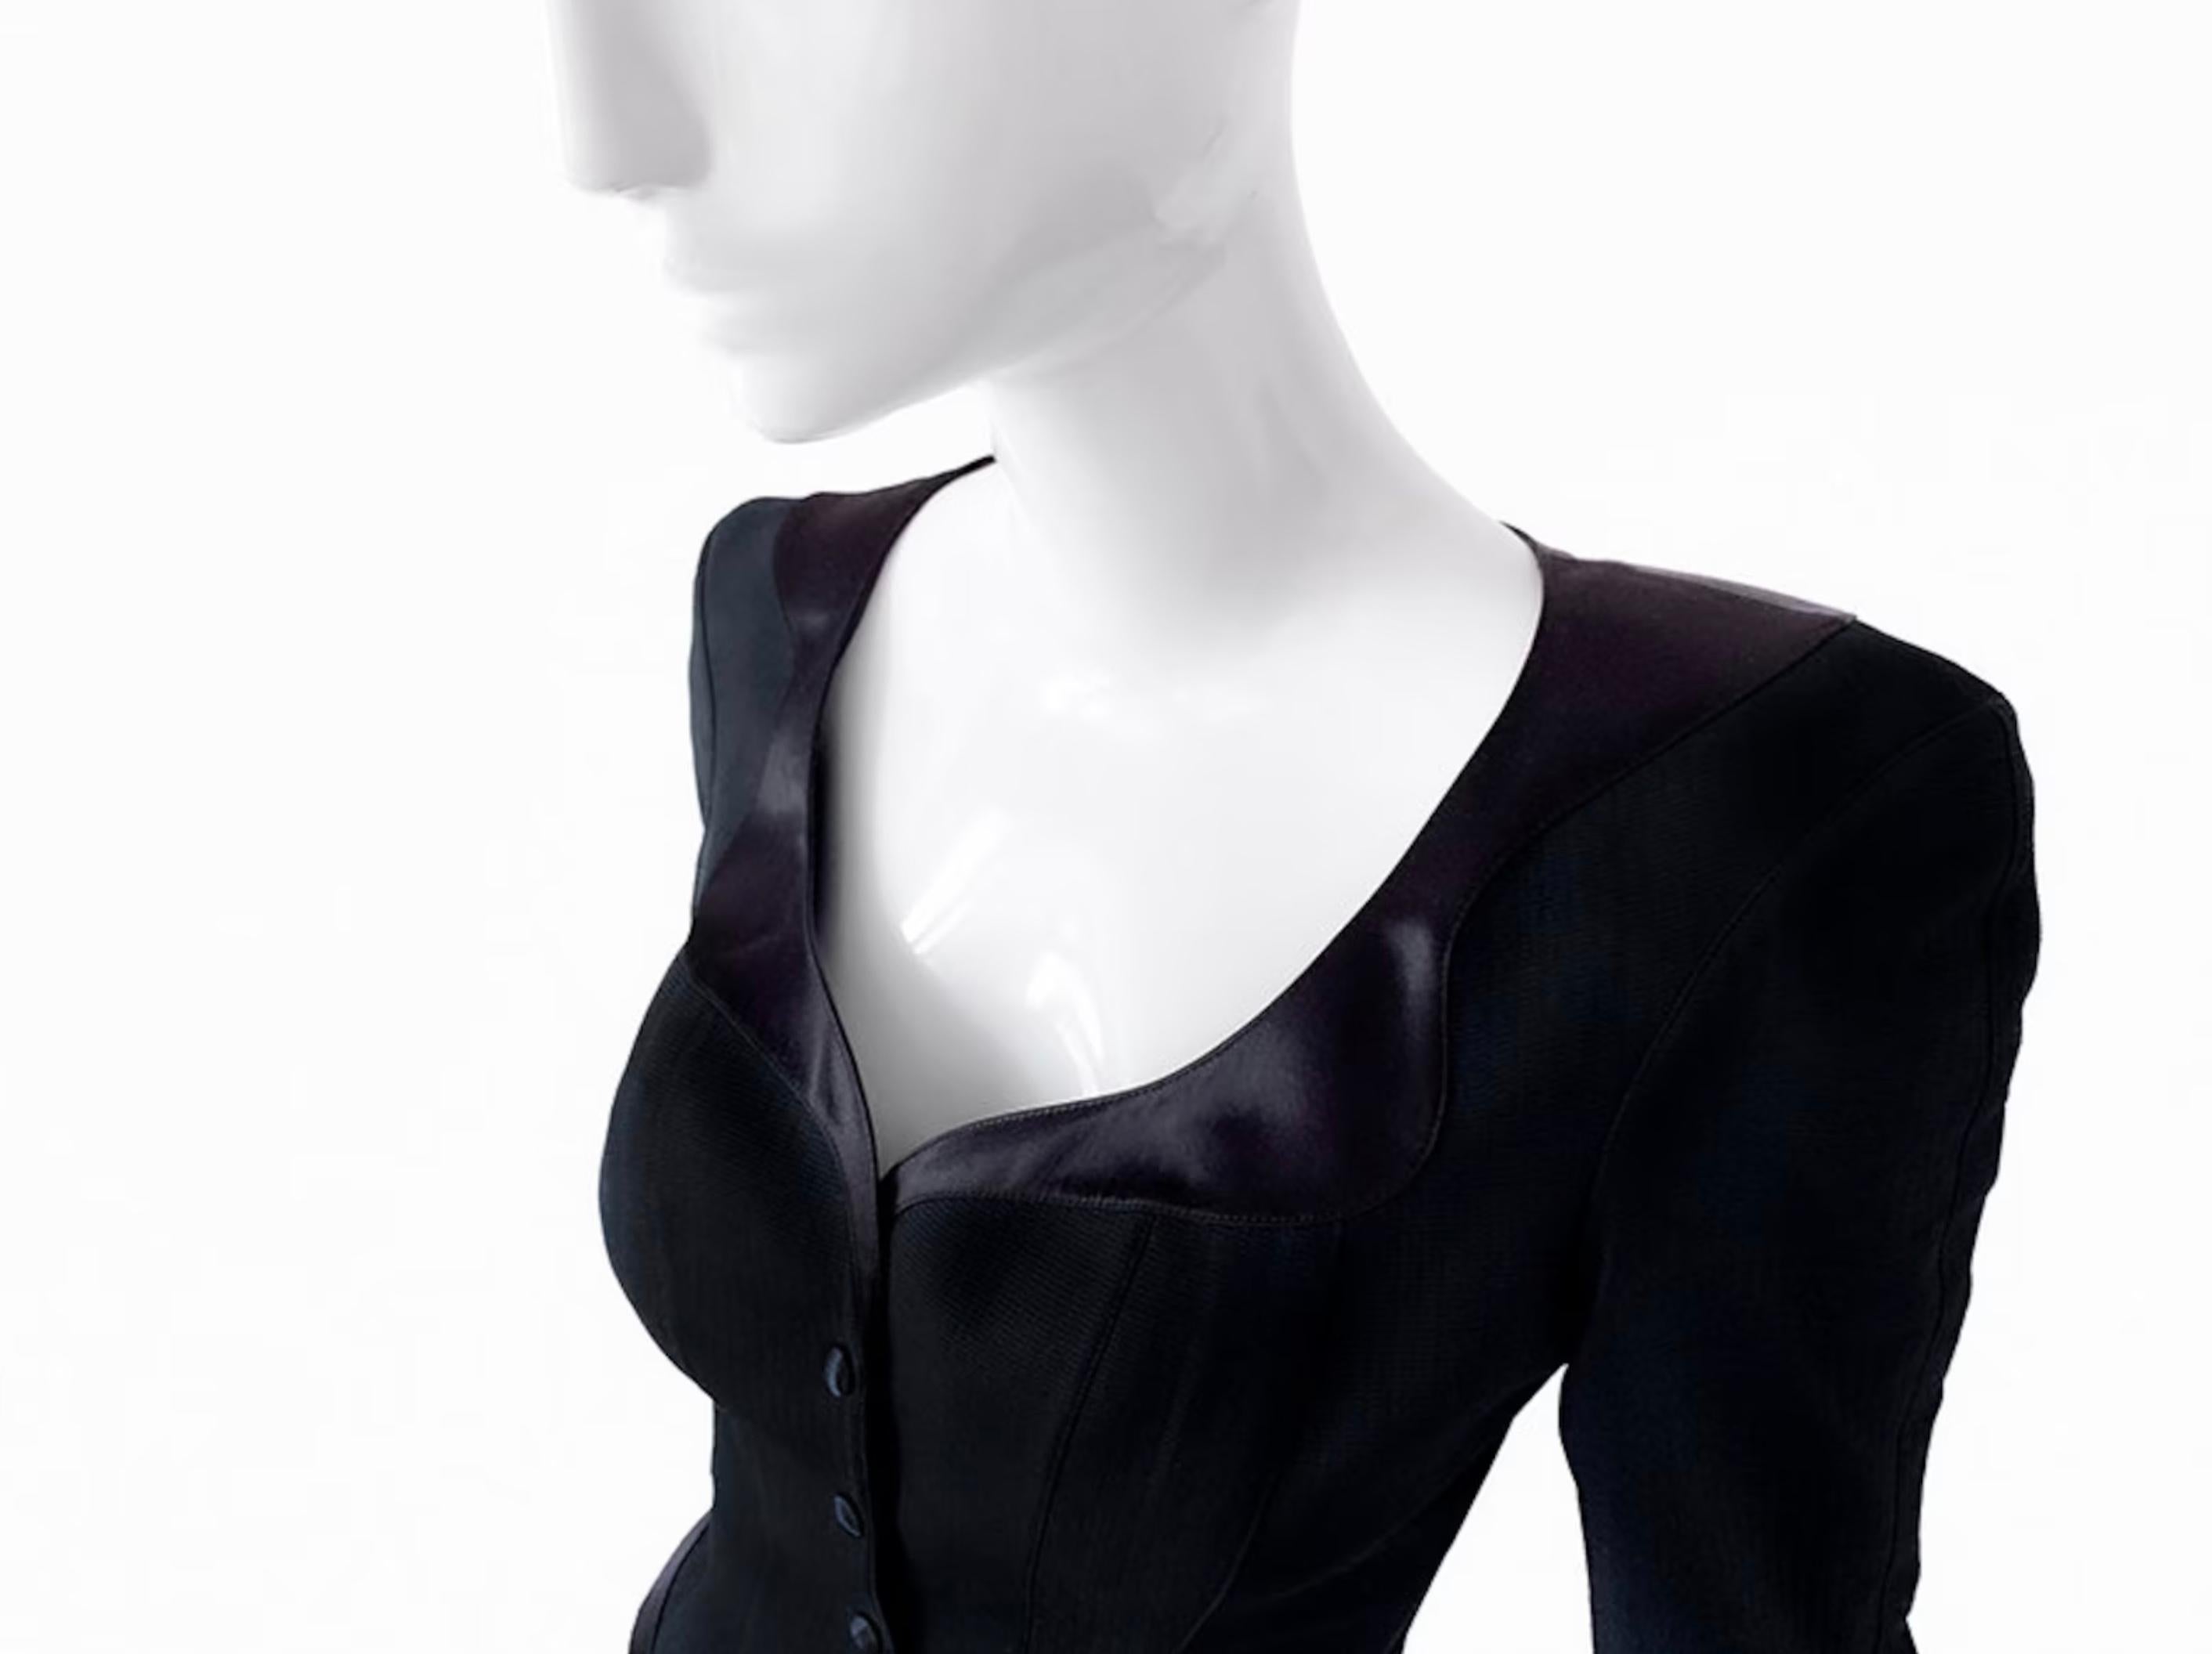 
Beautiful rare vintage Thierry Mugler skirtszut, Bassuming FW 1992 Collection. Two piece ensemble: Jacket and Skirt. Black jacket top with shimmering silky satin details on collar, cuffs, waist and hem. Amazing construction, the shape is so